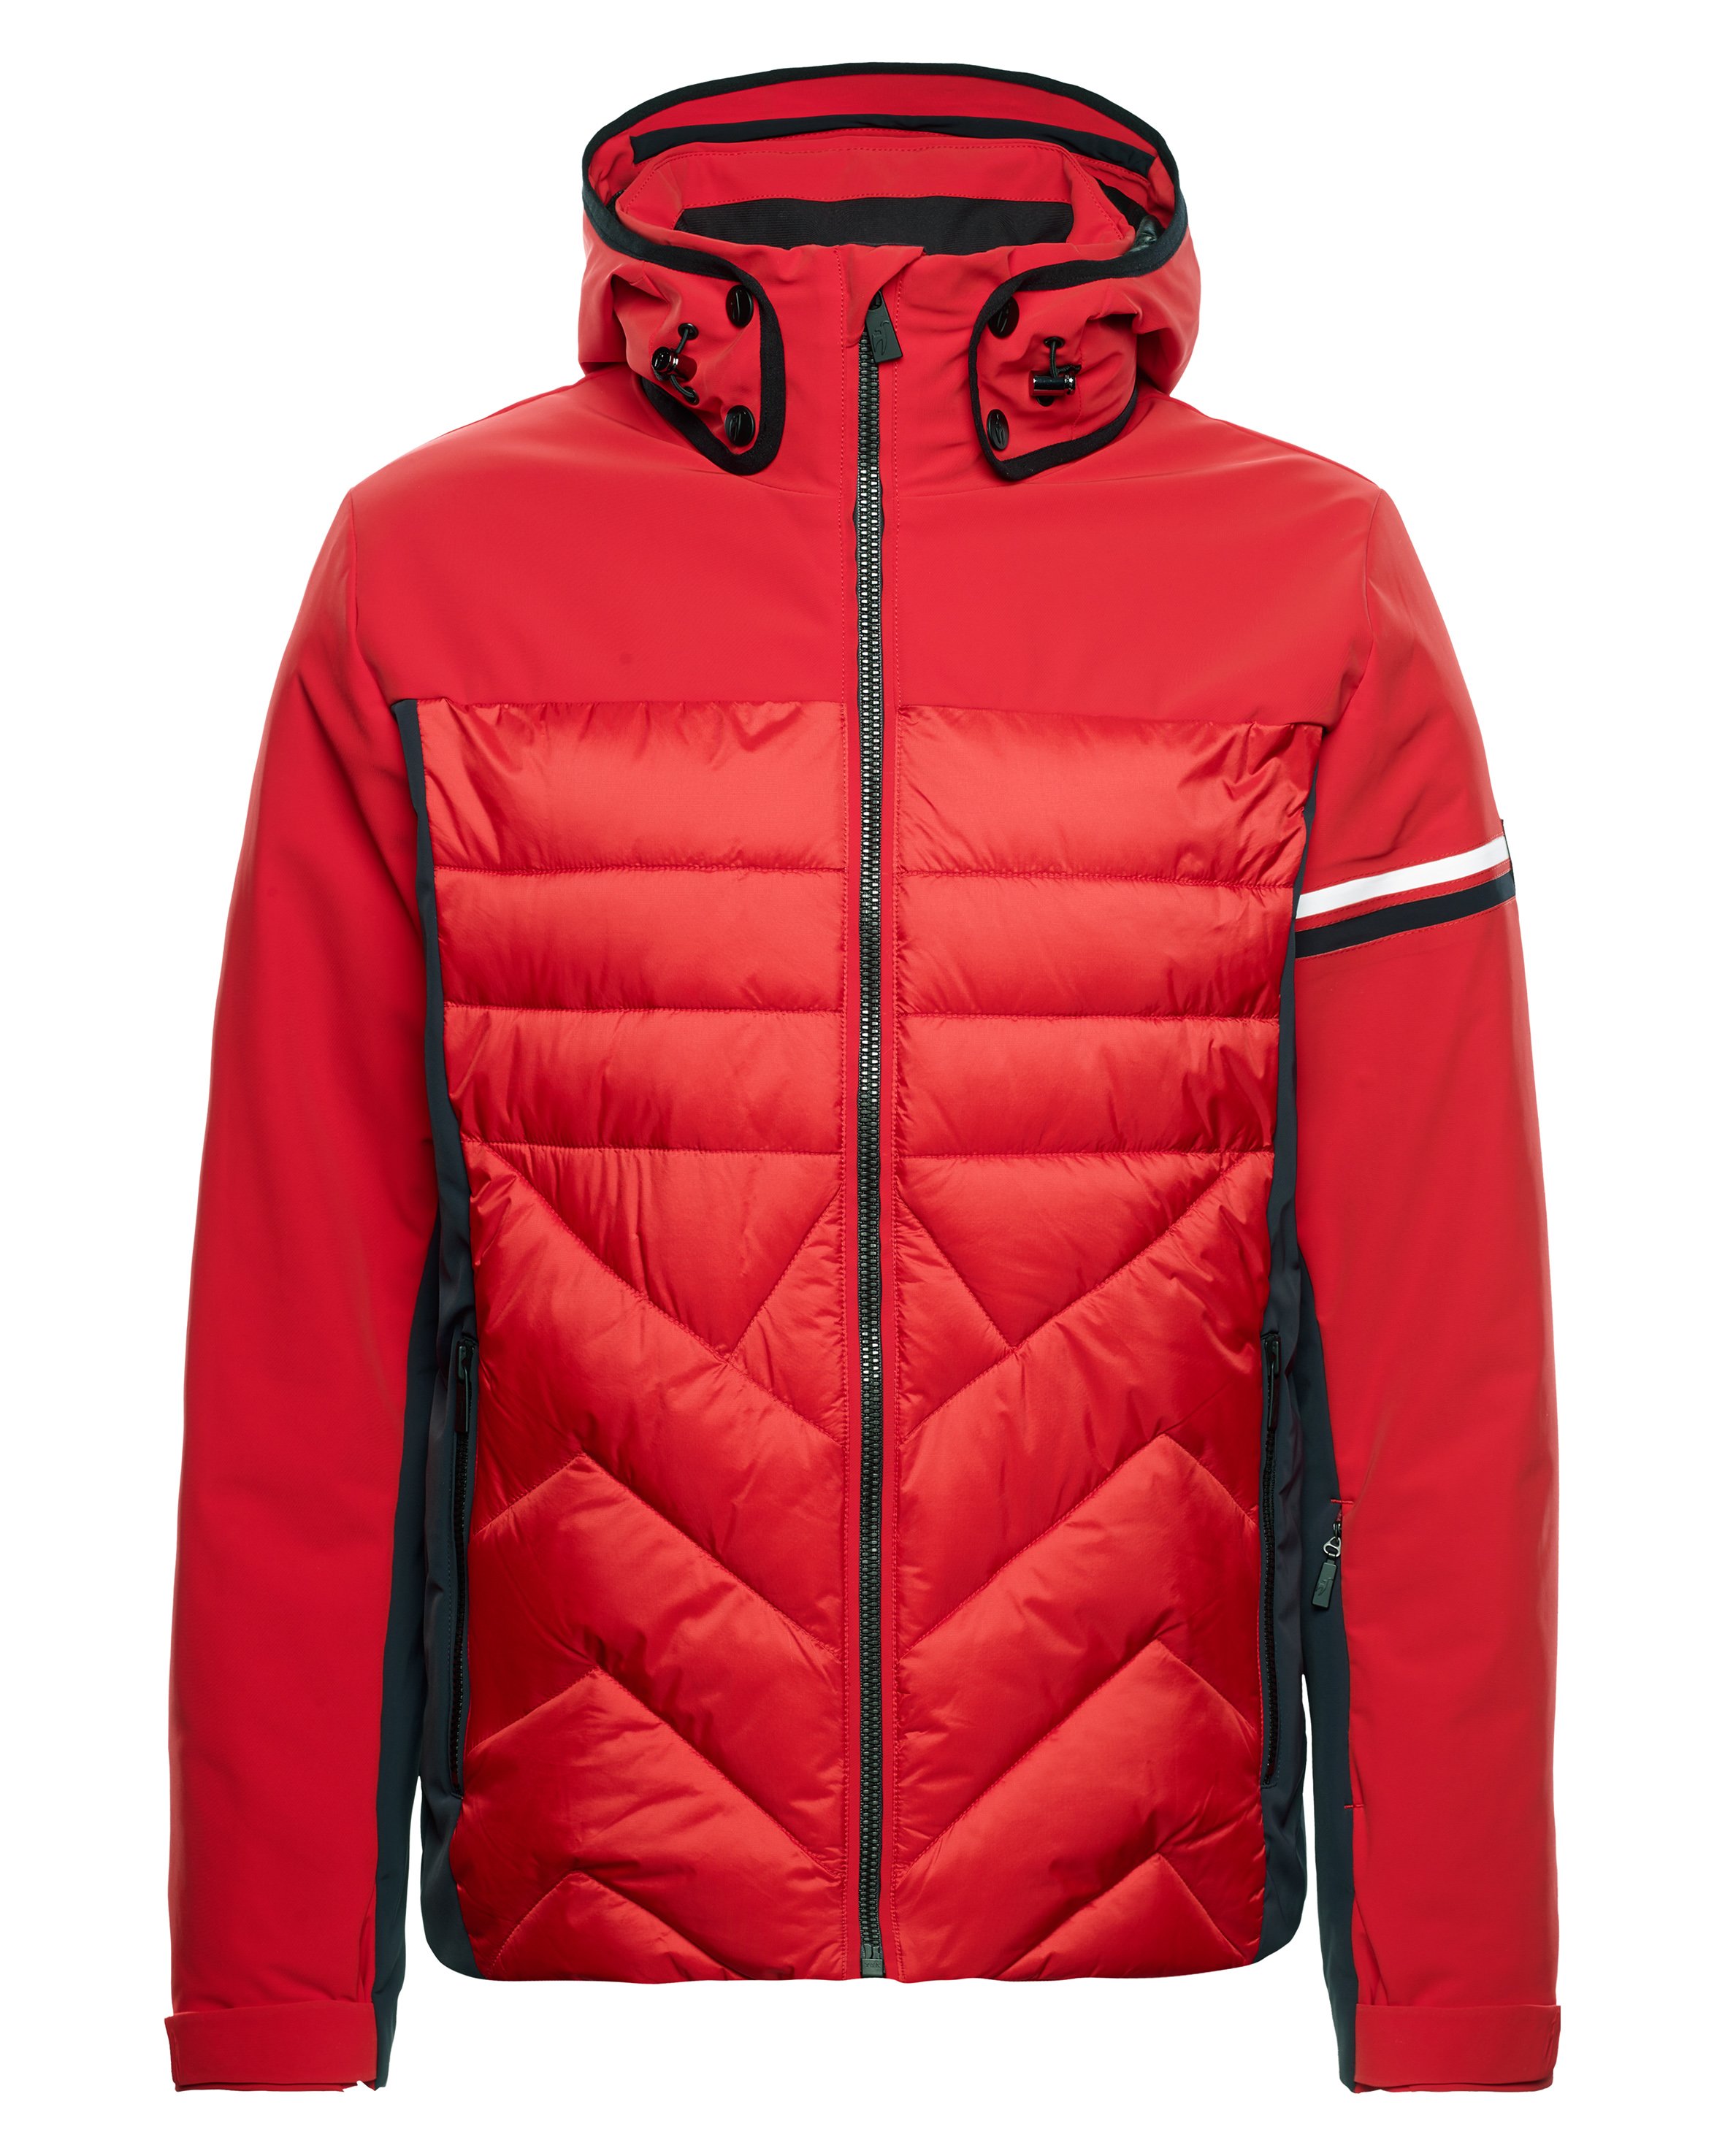 In-Sport Fashions - Canadian Leading Outdoor and Sports Brands Distributor